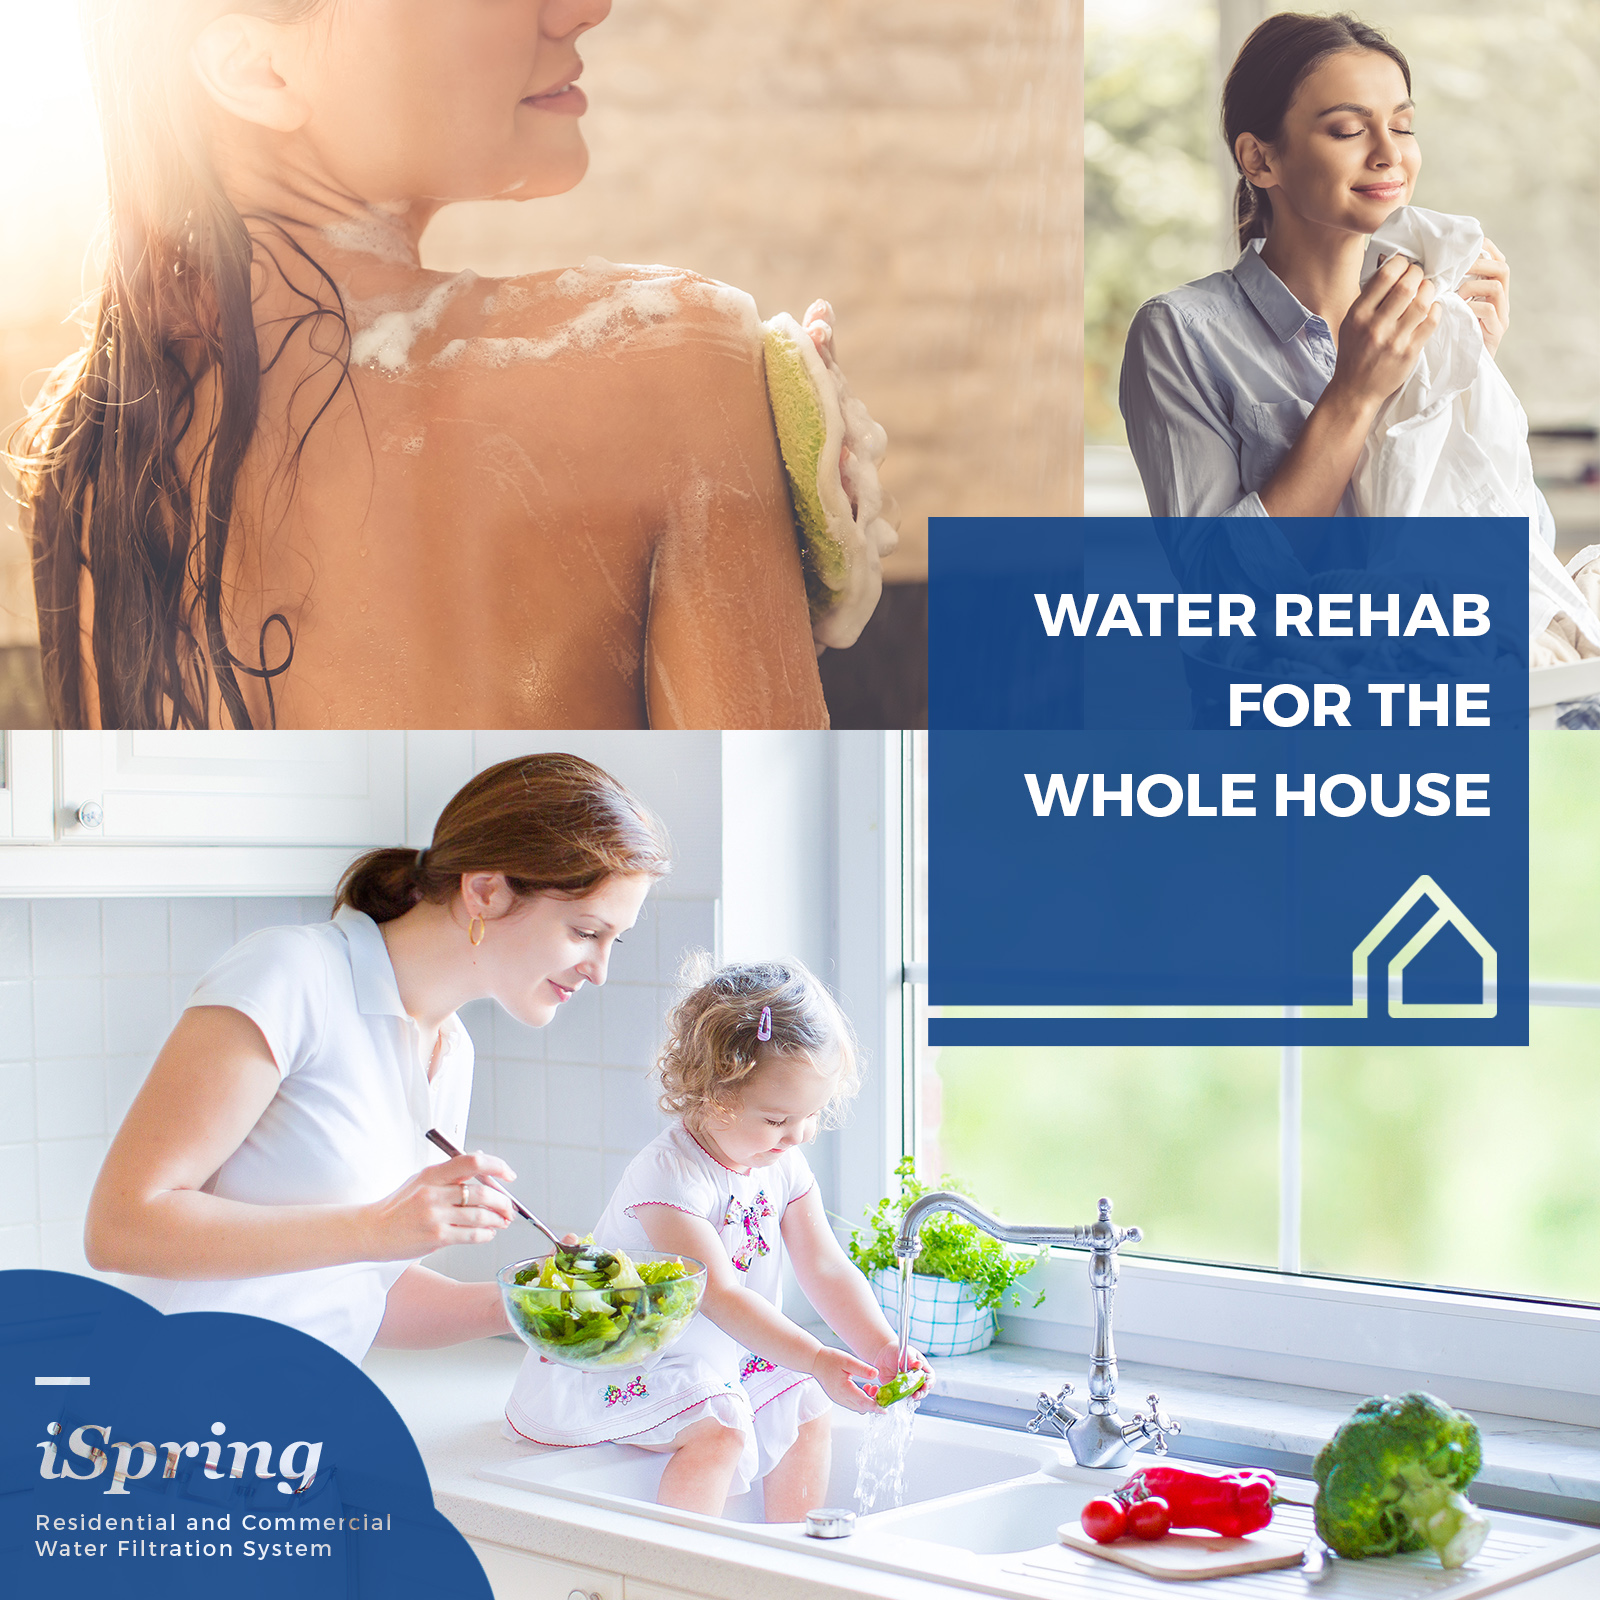 High Quality water from Ispring system